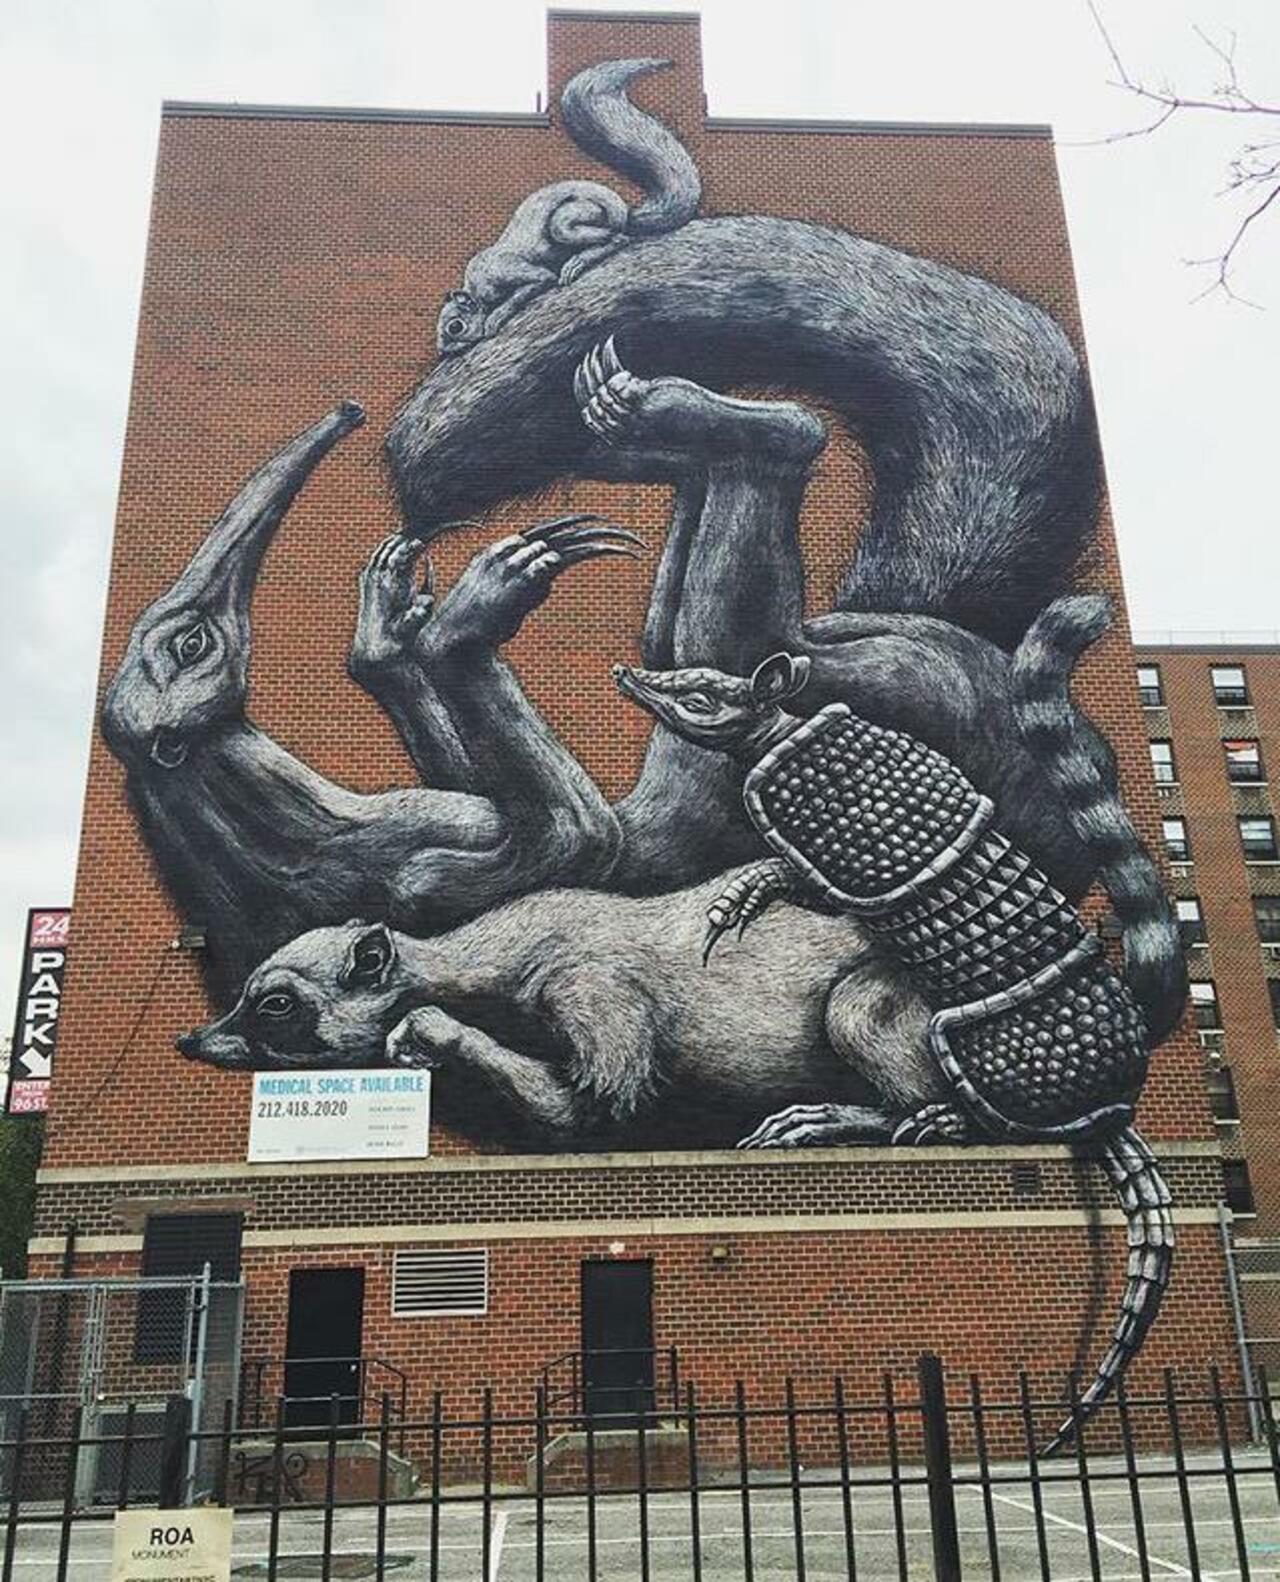 The completed new large scale Street Art wall by ROA in NYC

#art #graffiti #mural #streetart http://t.co/EoIbm3oe5a